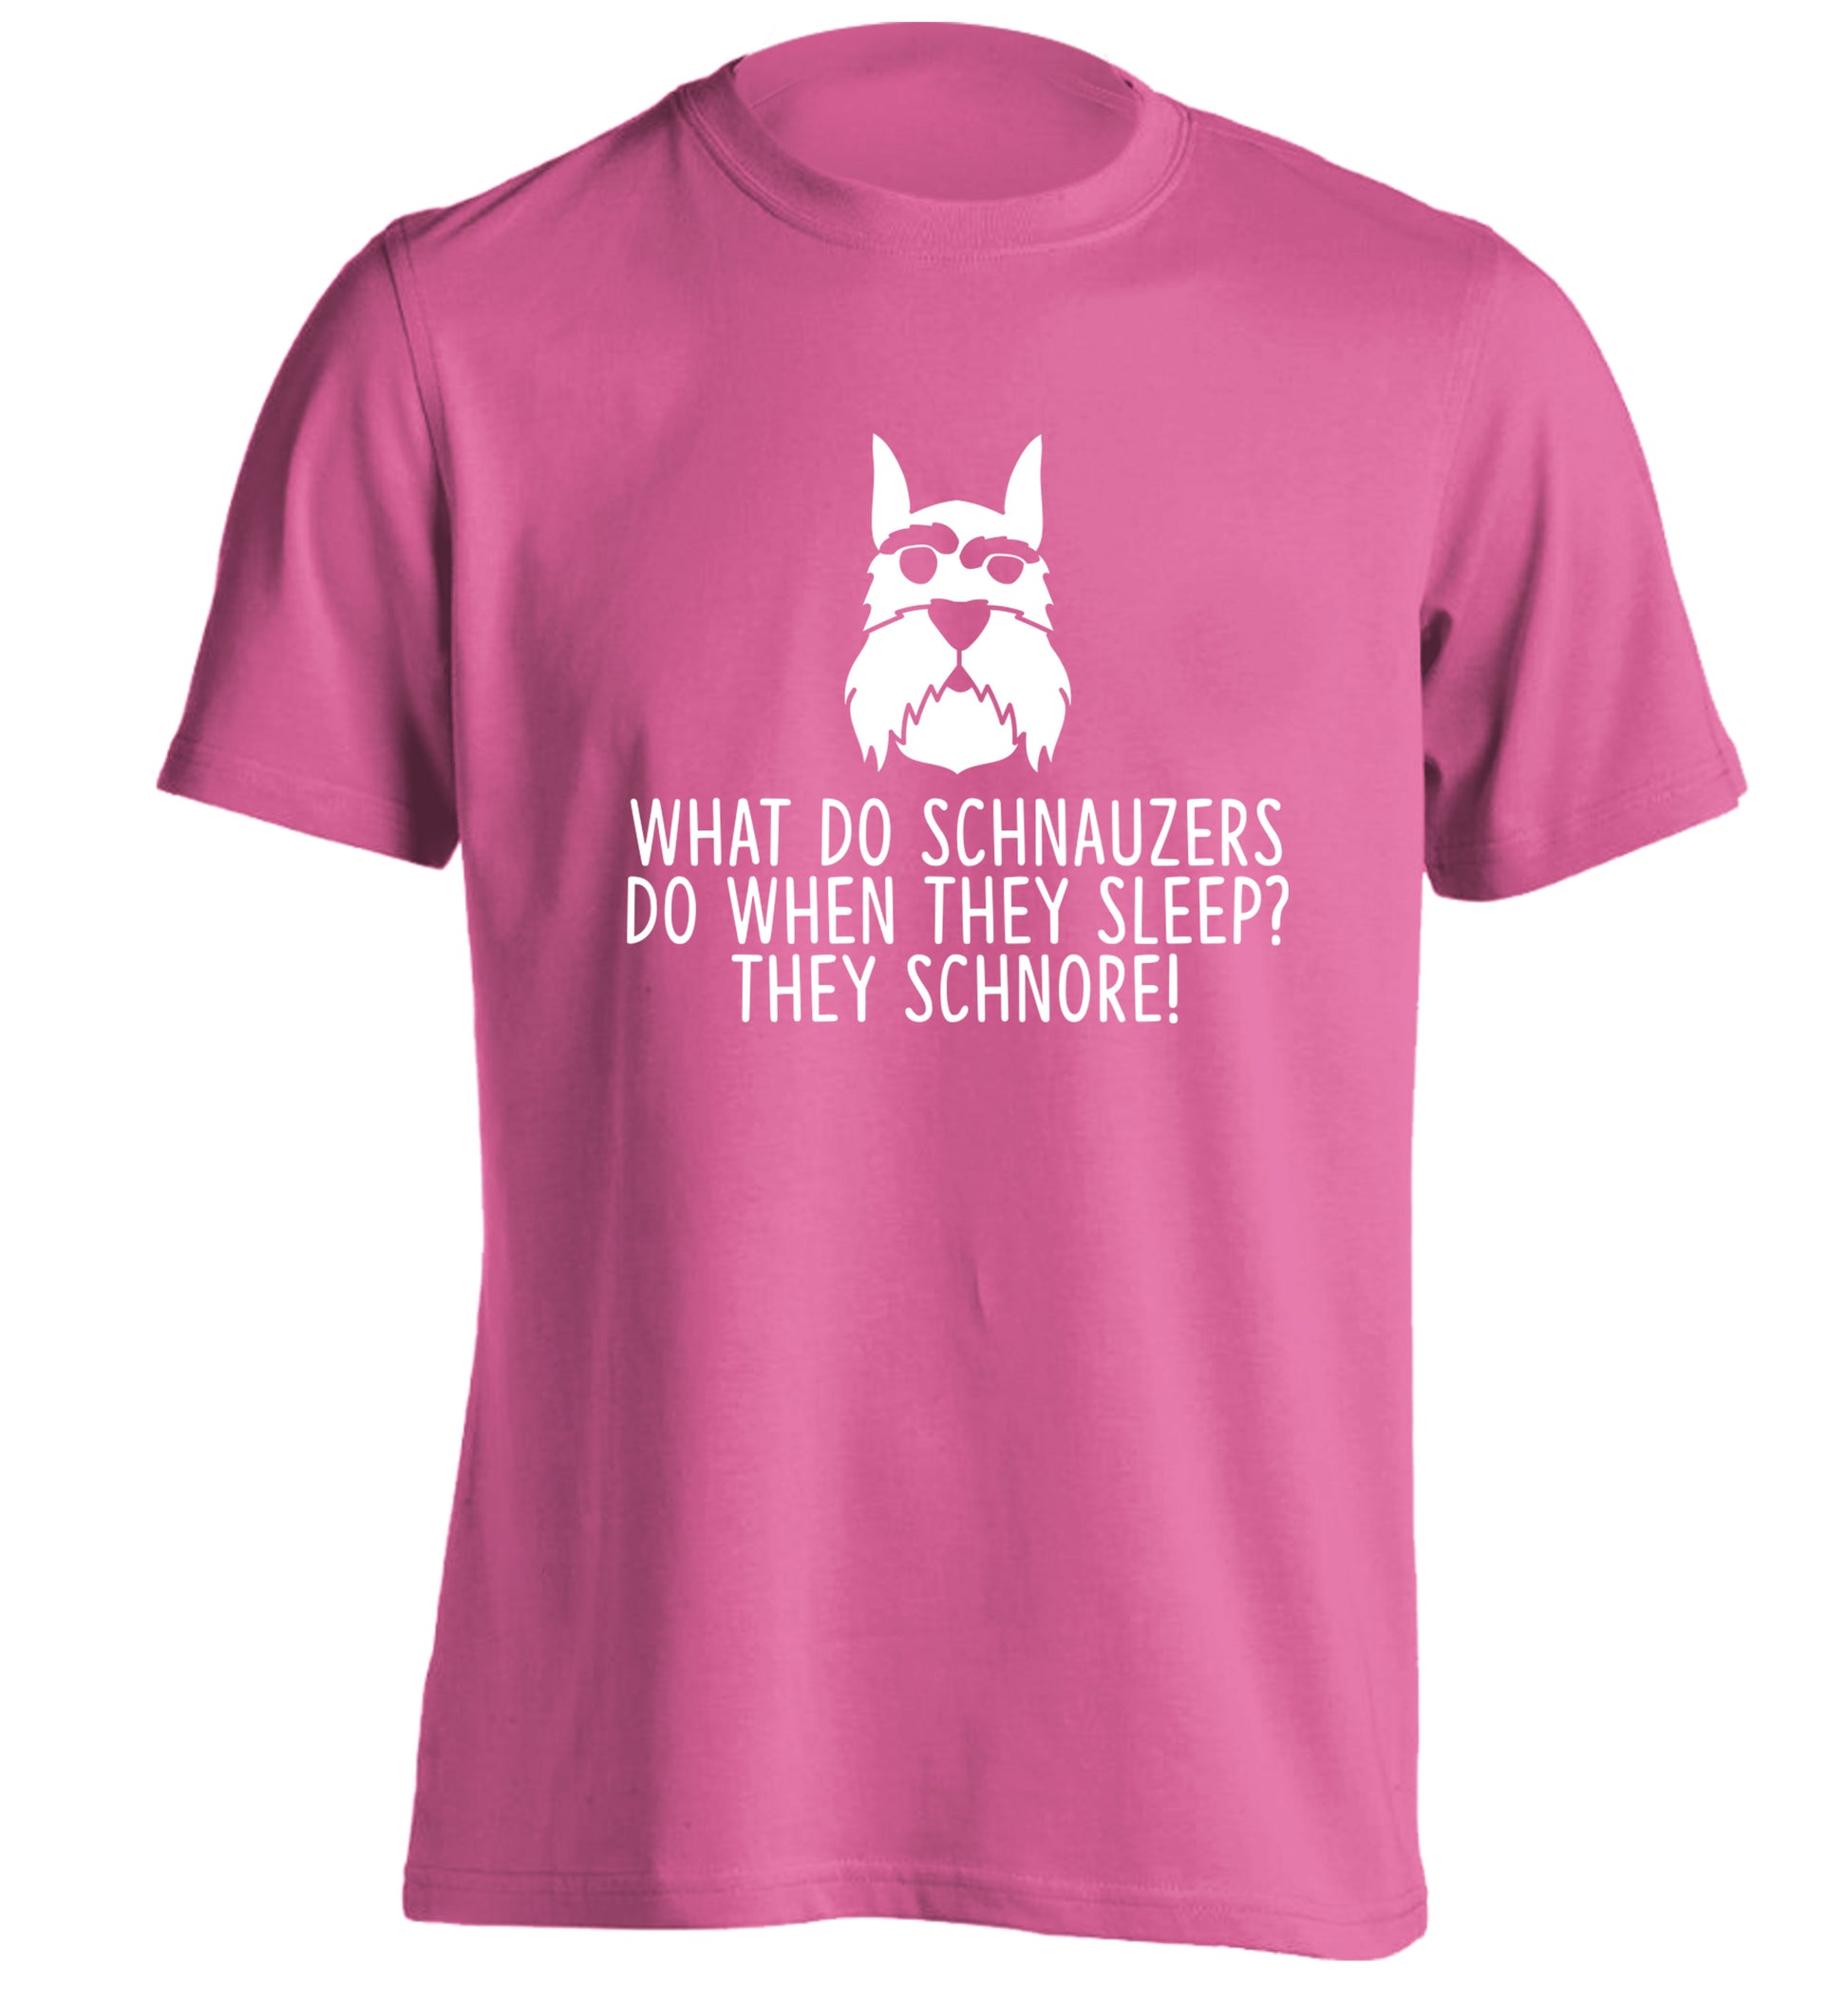 What do schnauzers do when they sleep? Schnore! adults unisex pink Tshirt 2XL